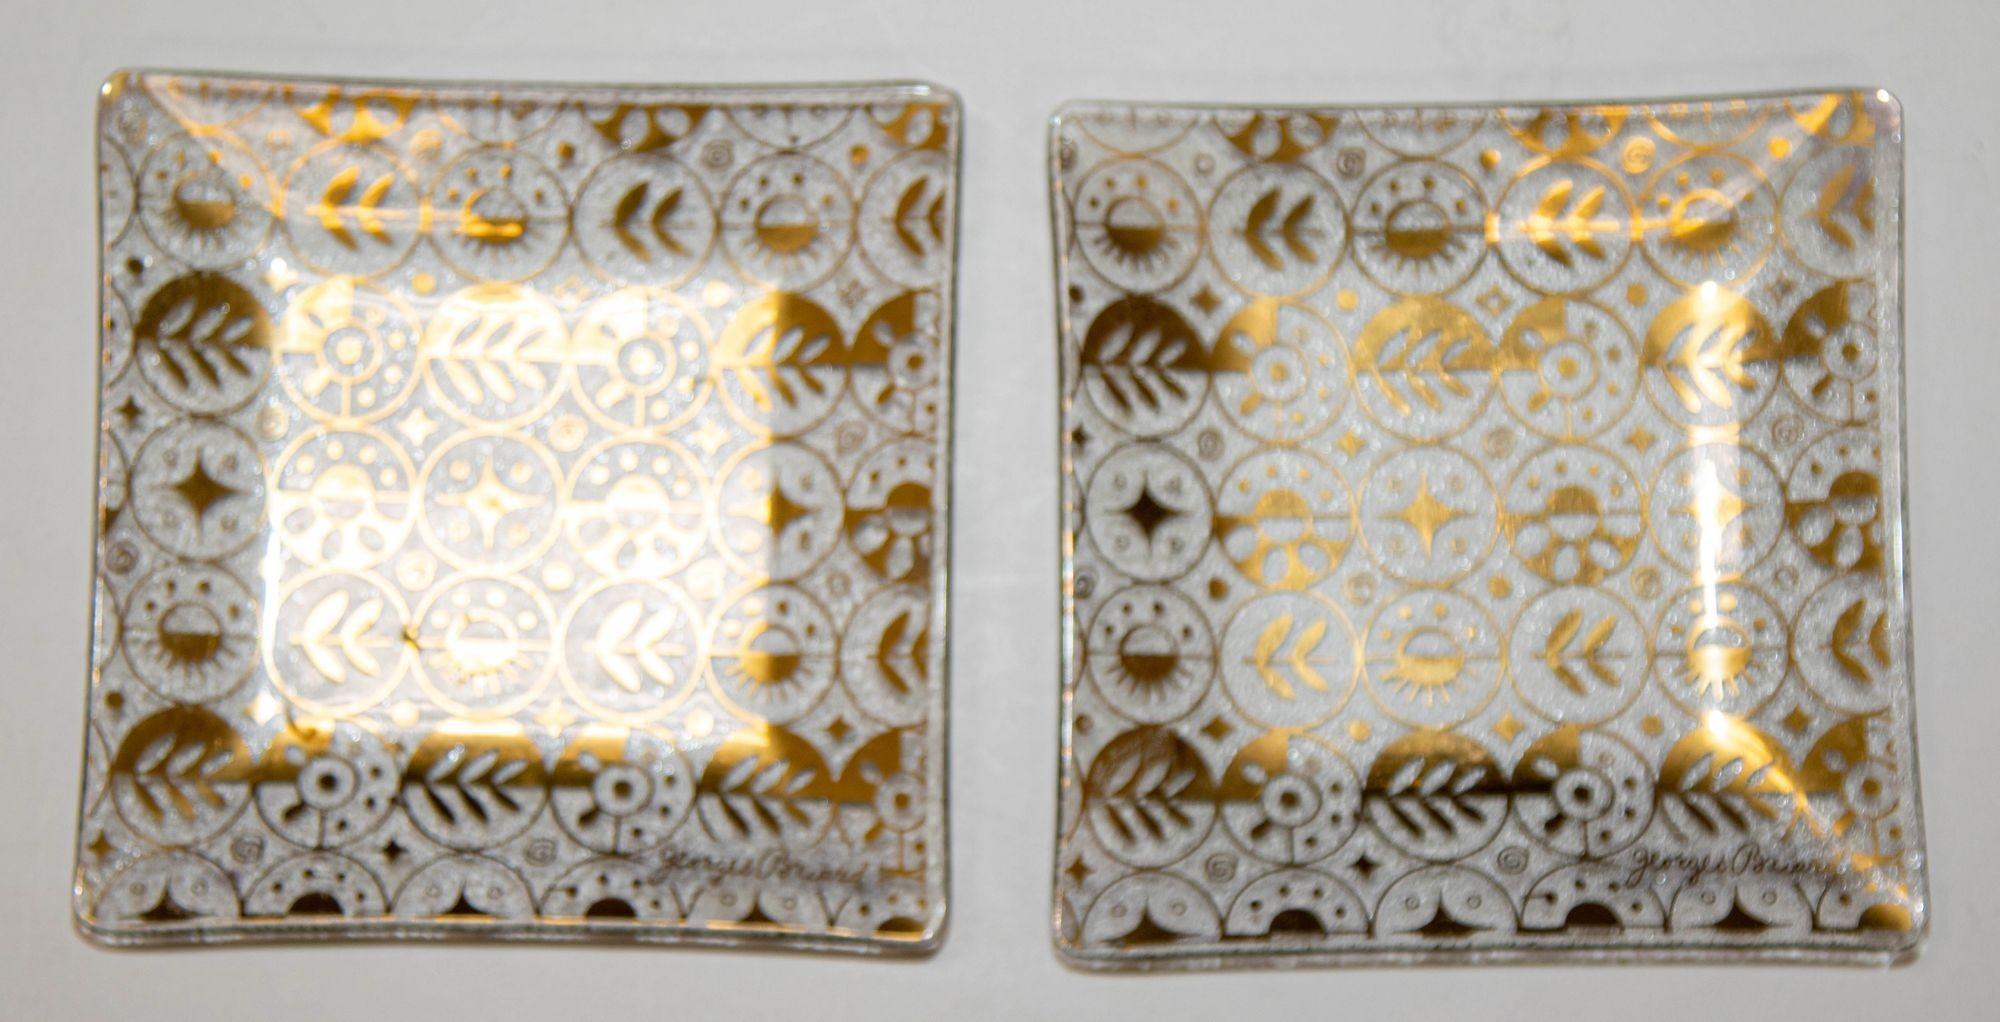 Midcentury Georges Briard Gilt Glass Appetizers Dishes Set of 2 For Sale 12